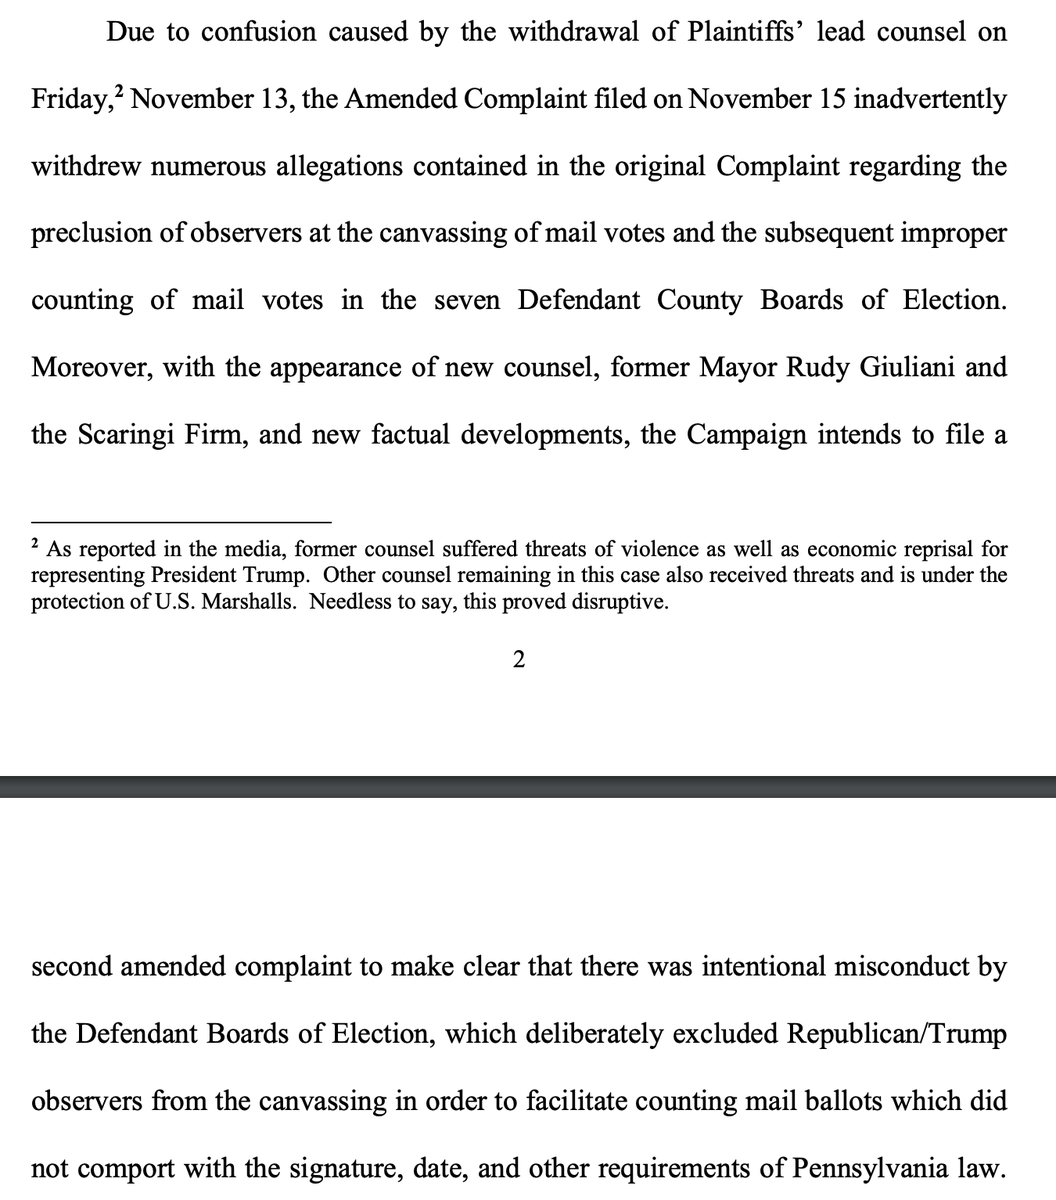 The Trump campaign says that its first amended complaint "inadvertently withdrew" large sections devoted to their (unsubstantiated) observer claims due to "confusion caused by the withdrawal of [their] lead counsel." Don't miss the footnote.  https://www.courtlistener.com/recap/gov.uscourts.pamd.127057/gov.uscourts.pamd.127057.170.0_1.pdf